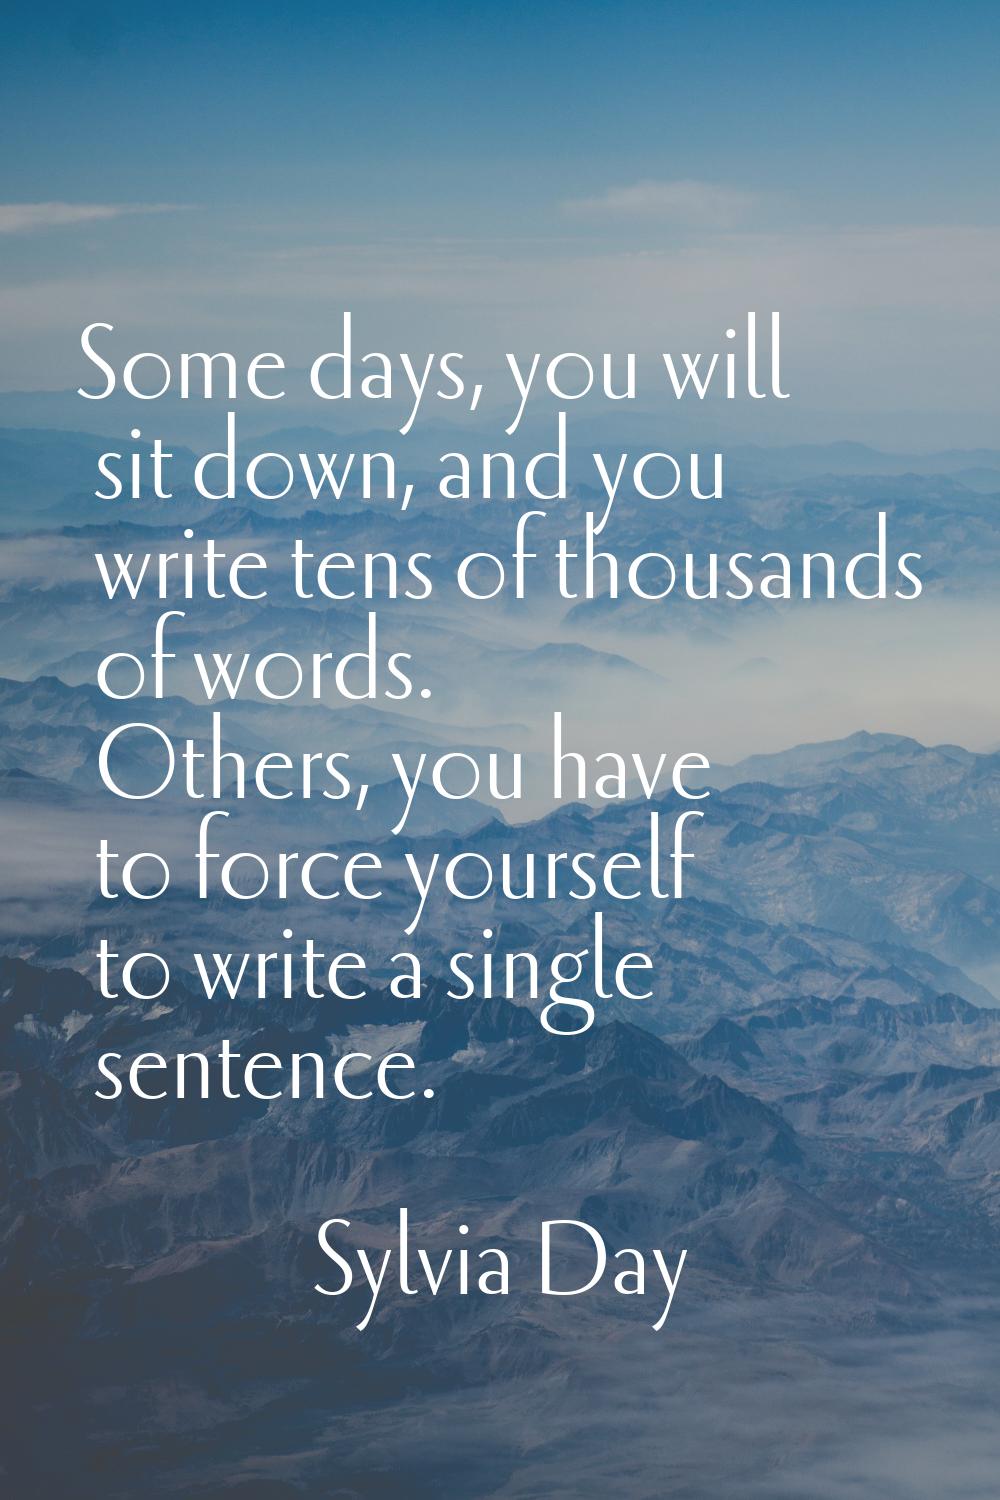 Some days, you will sit down, and you write tens of thousands of words. Others, you have to force y